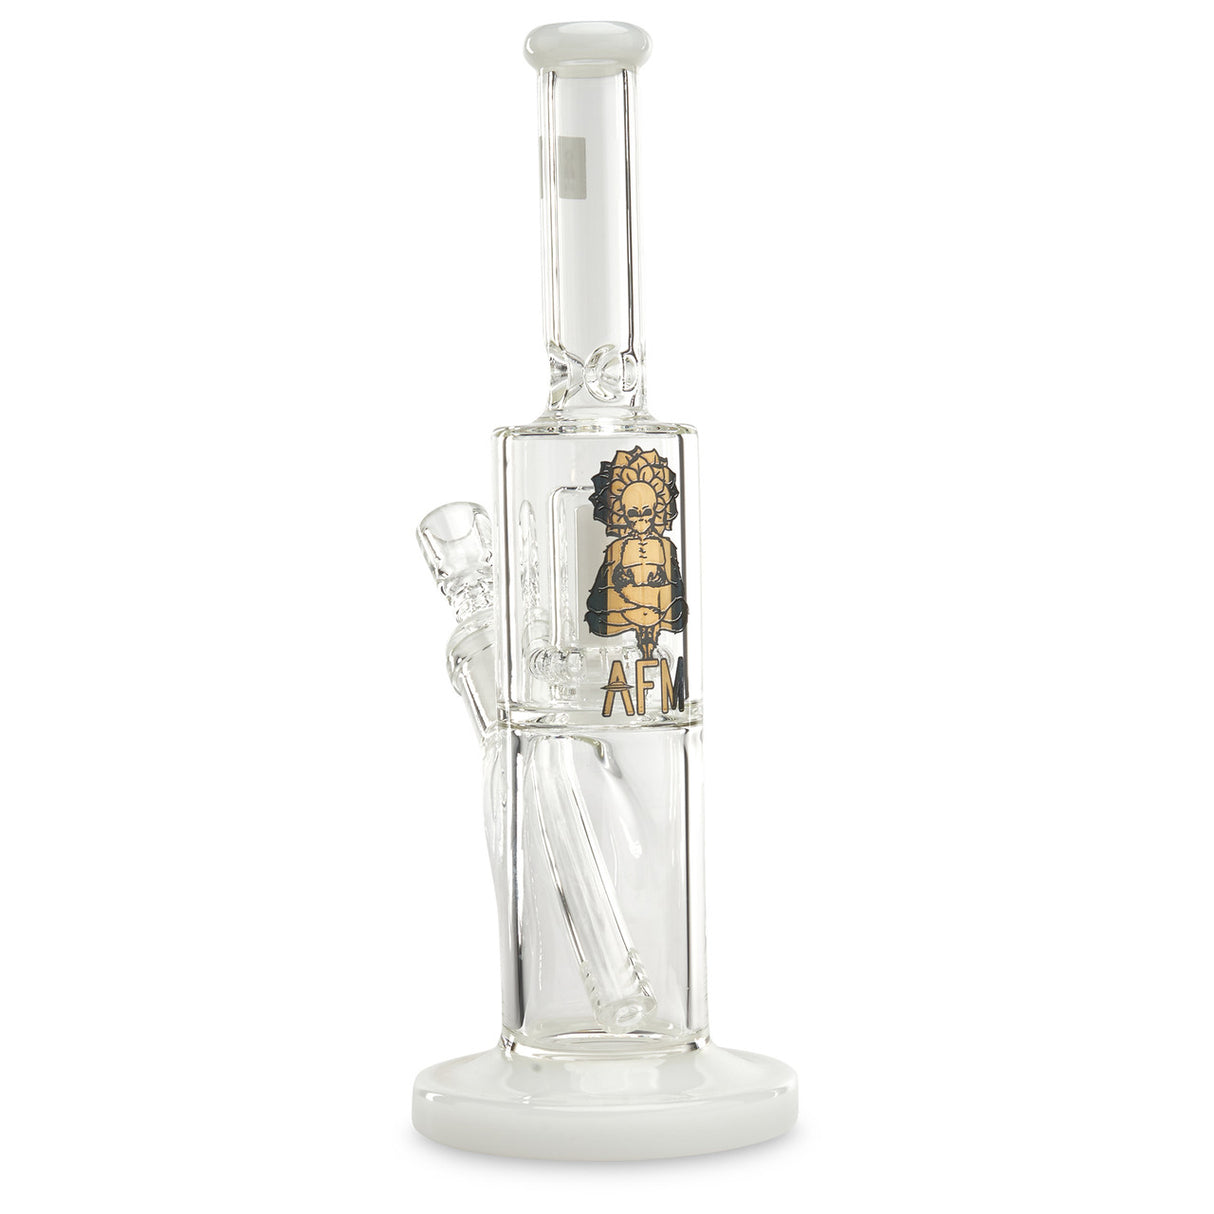 Cheap Glass White AFM Waterpipe For Sale